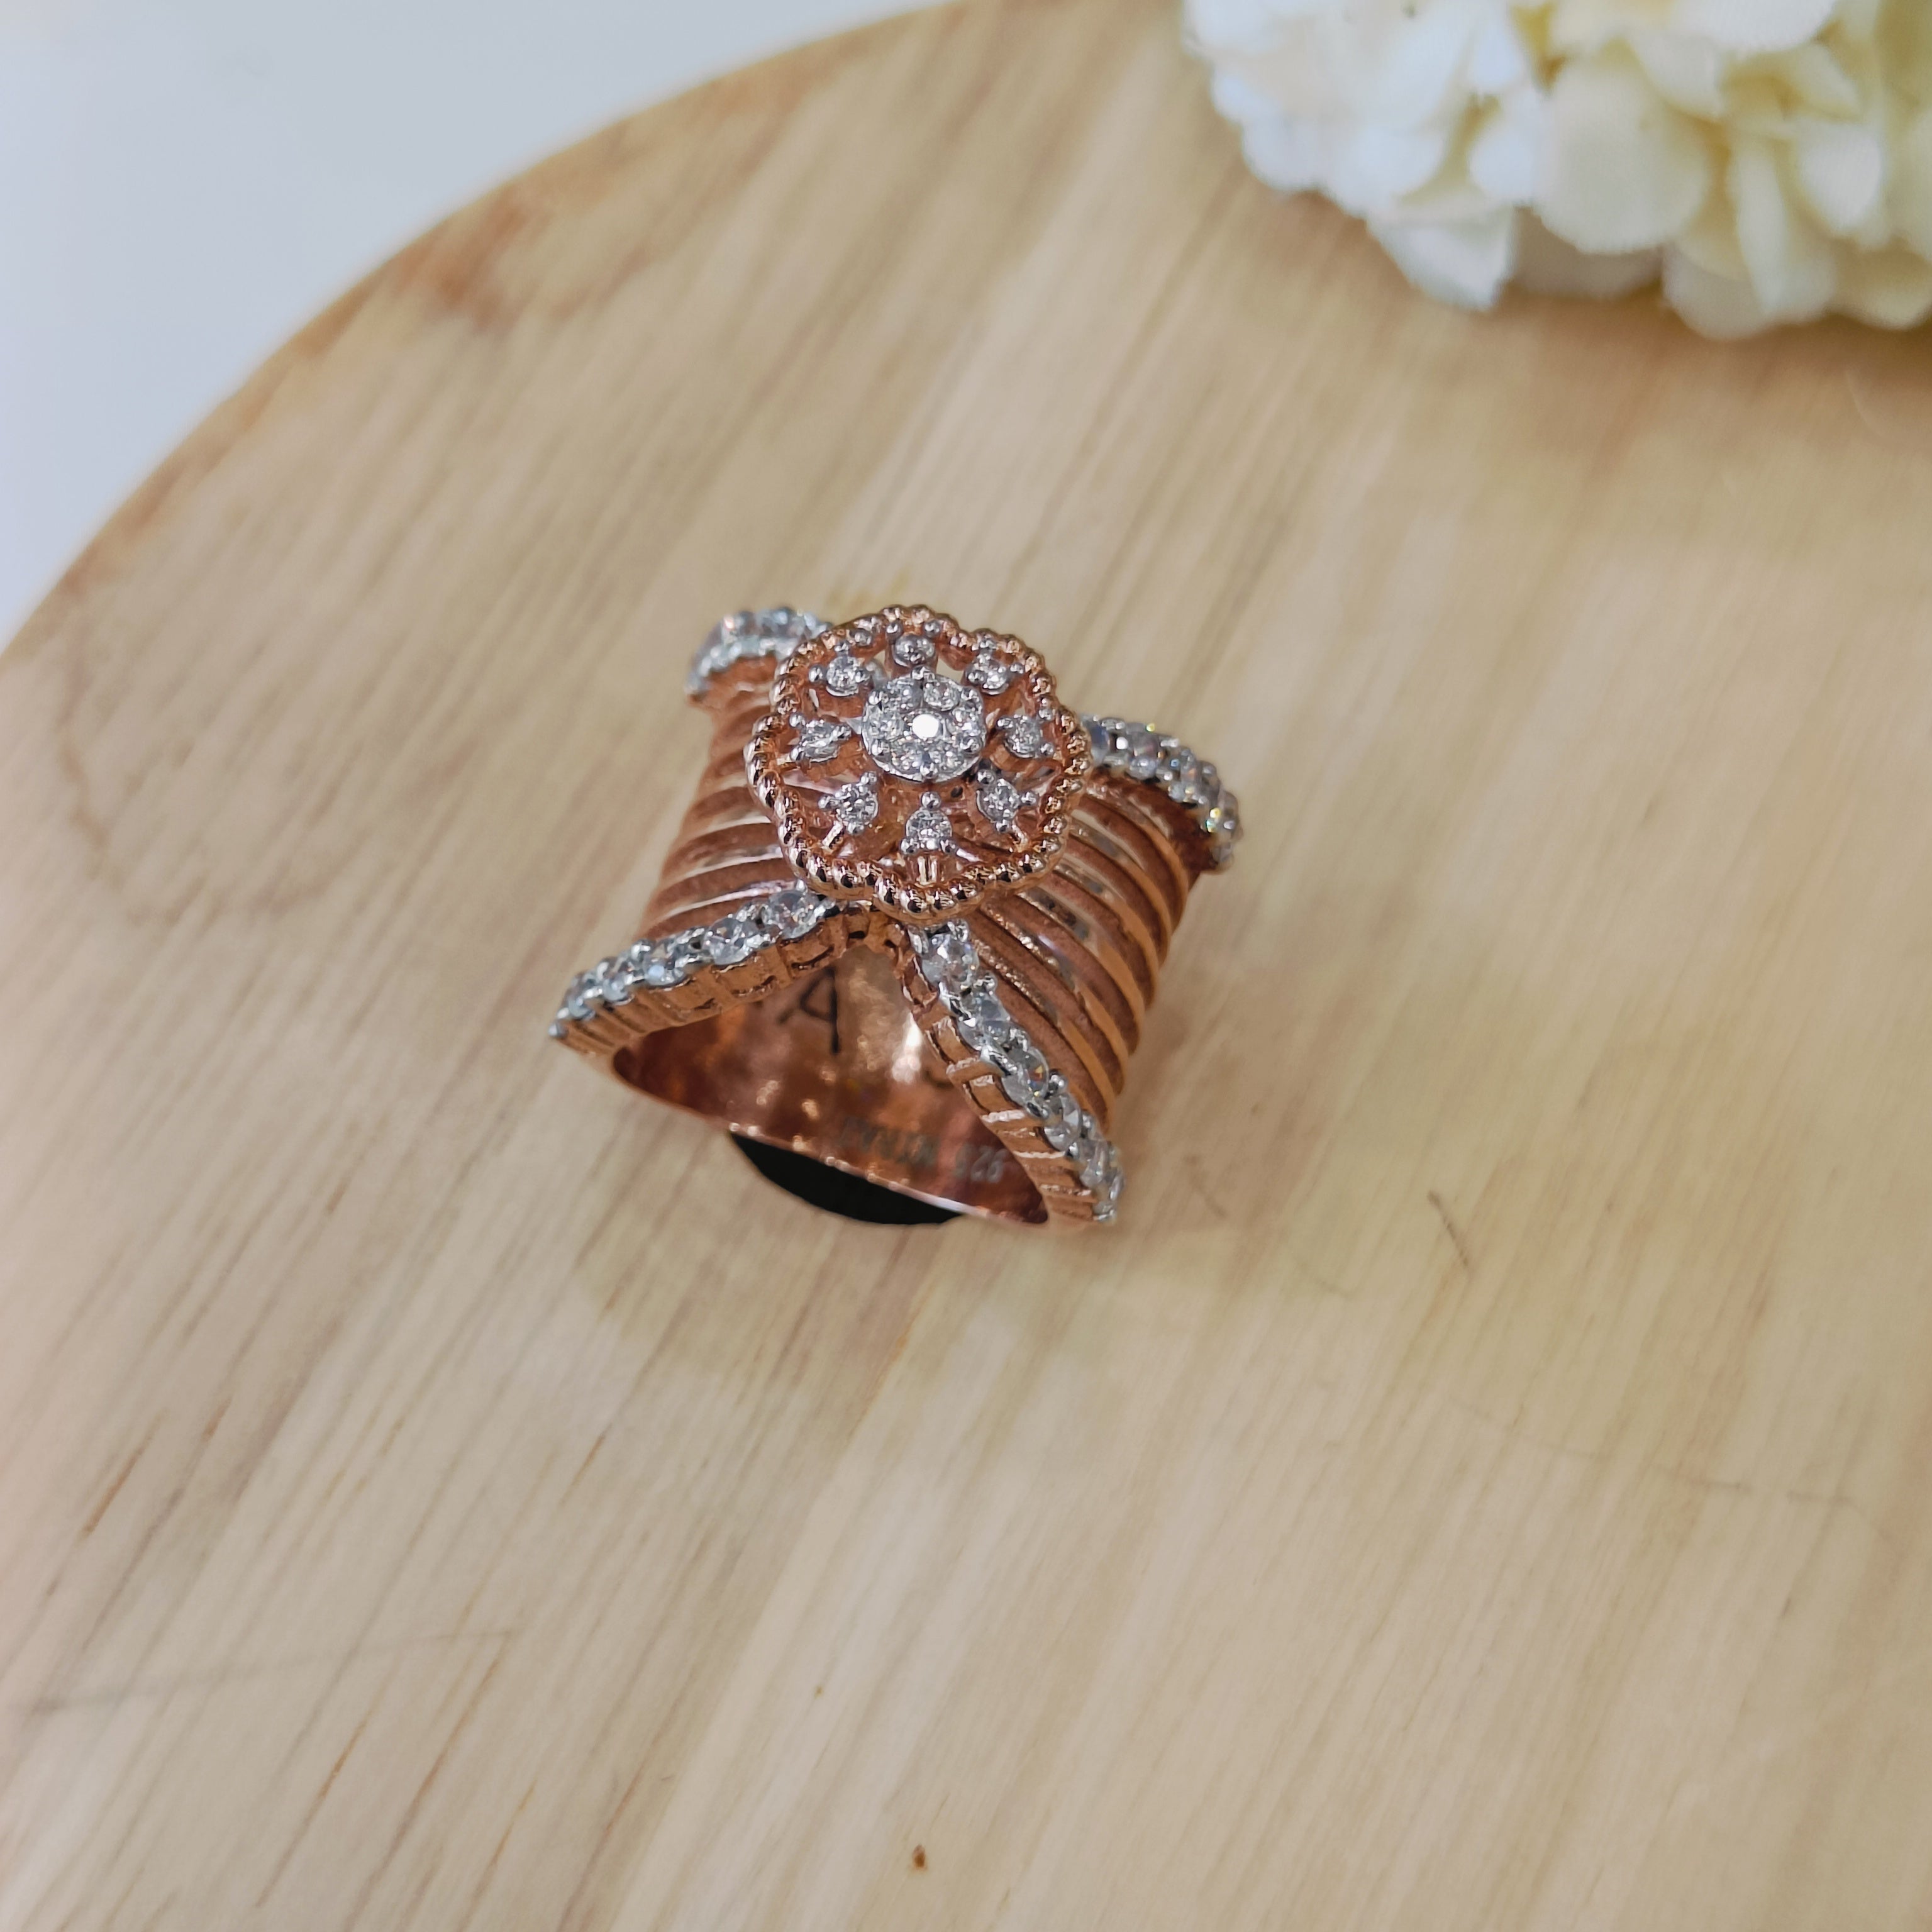 Vs sterling silver cocktail ring 169